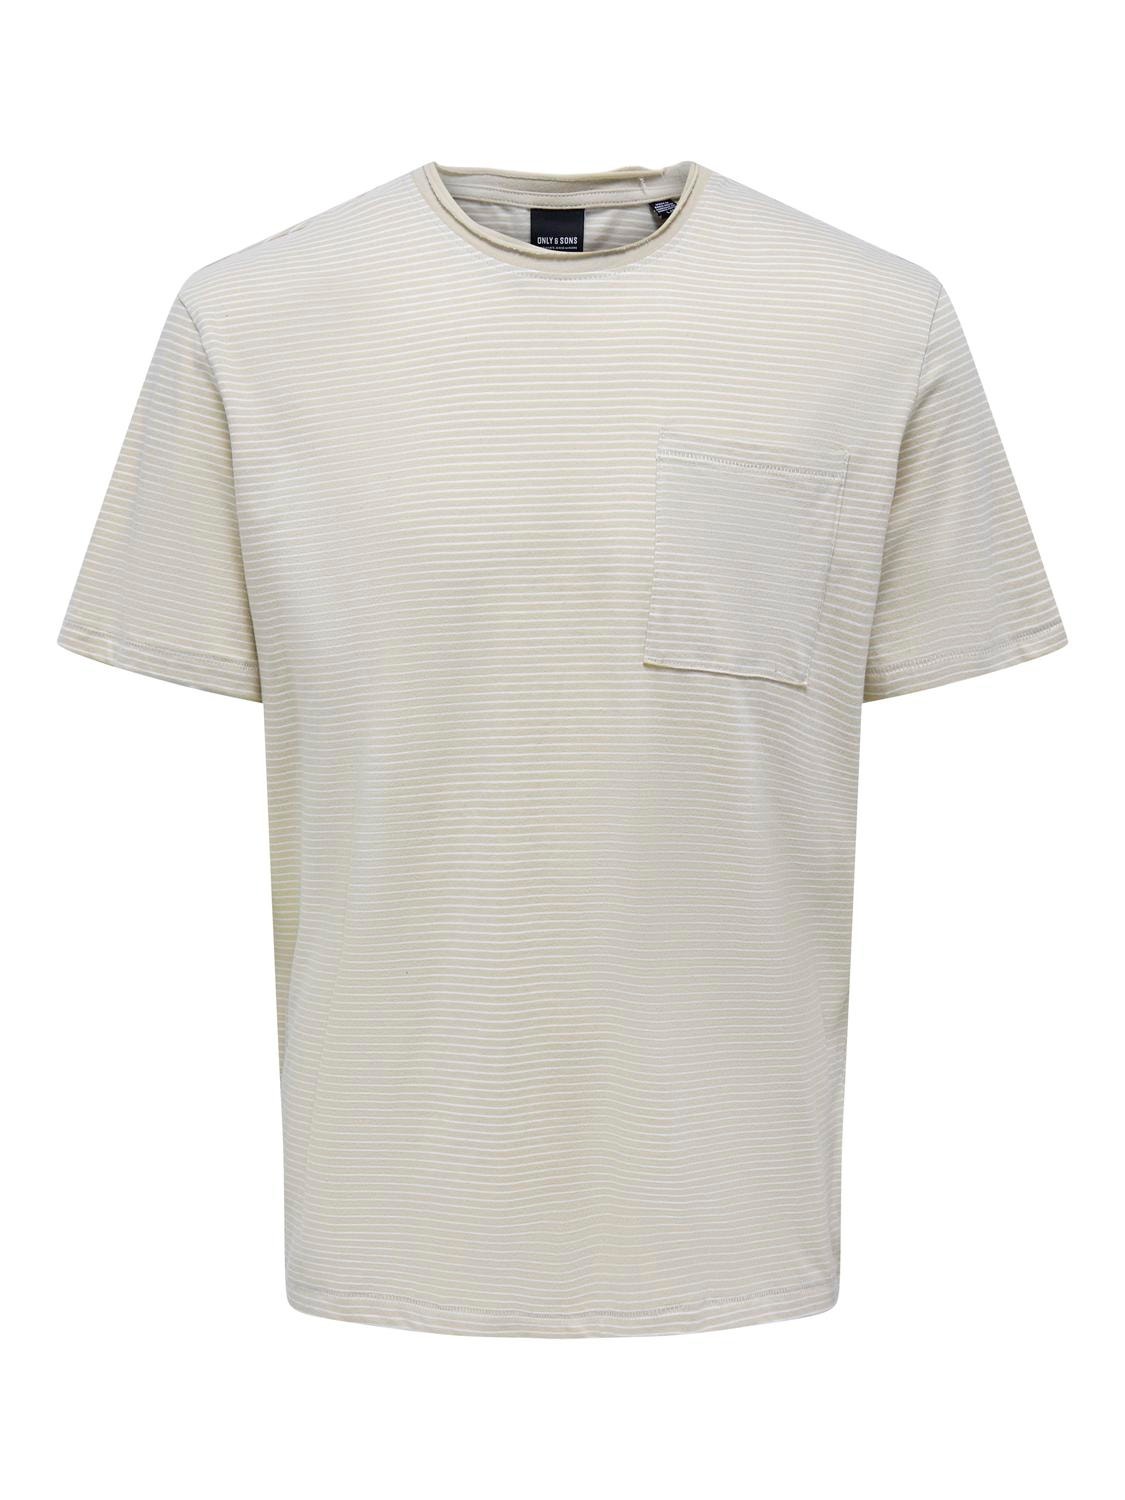 ONLY & SONS Stribet o-hals t-shirt med brystlomme -Pelican - 22025680